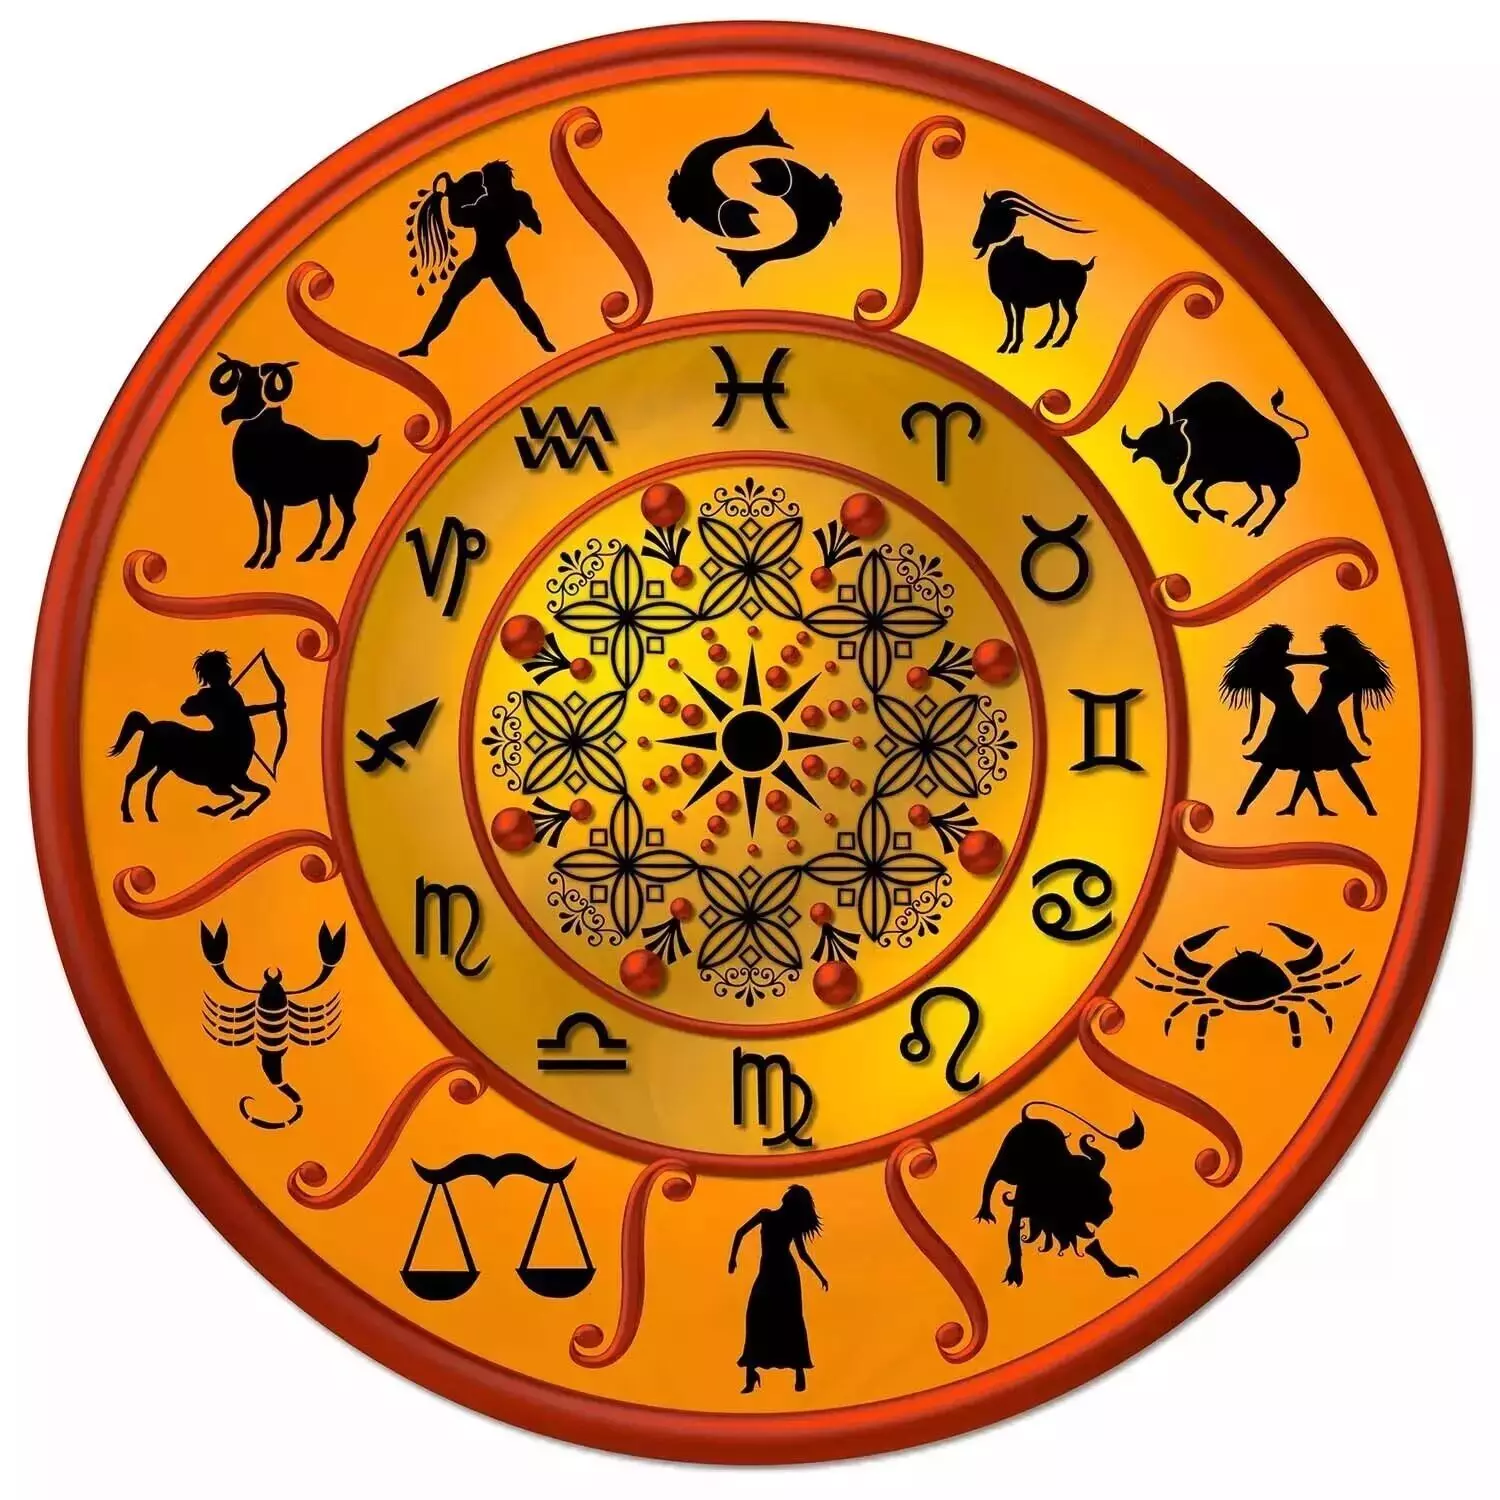 23 June  – Know your todays horoscope